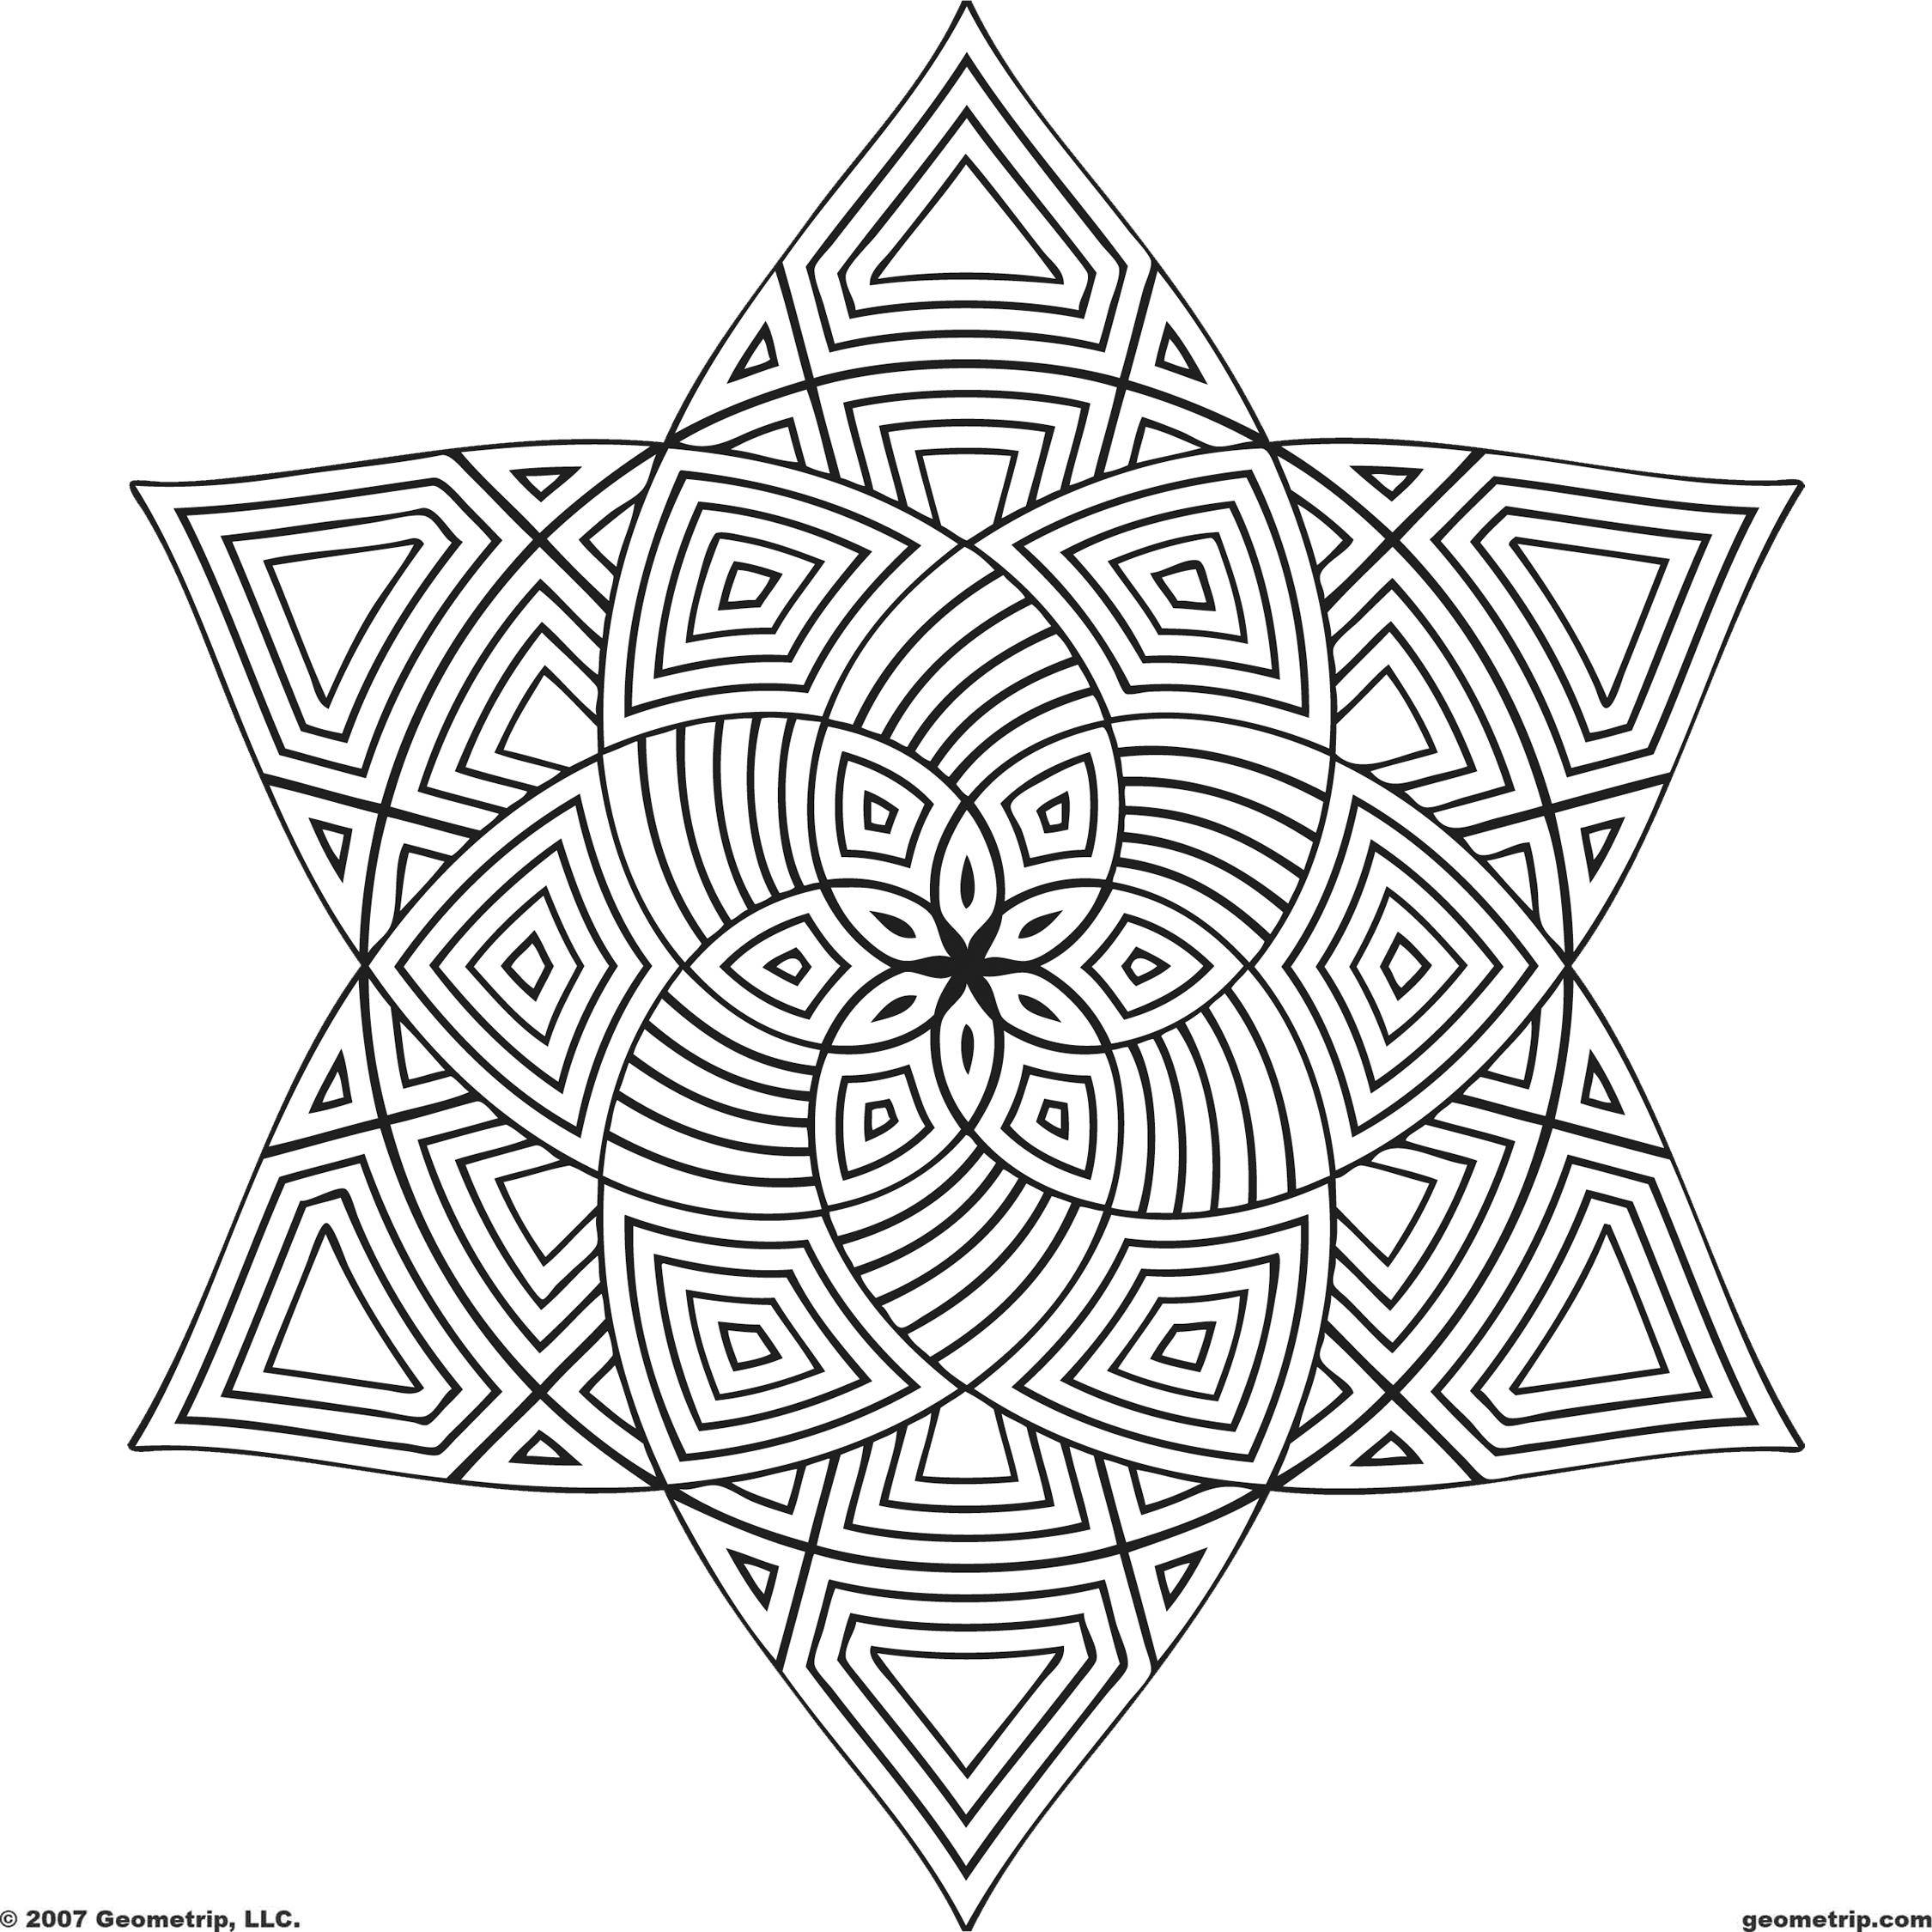 Coloring Flower in geometric patterns. Category With patterns. Tags:  Patterns, geometric.